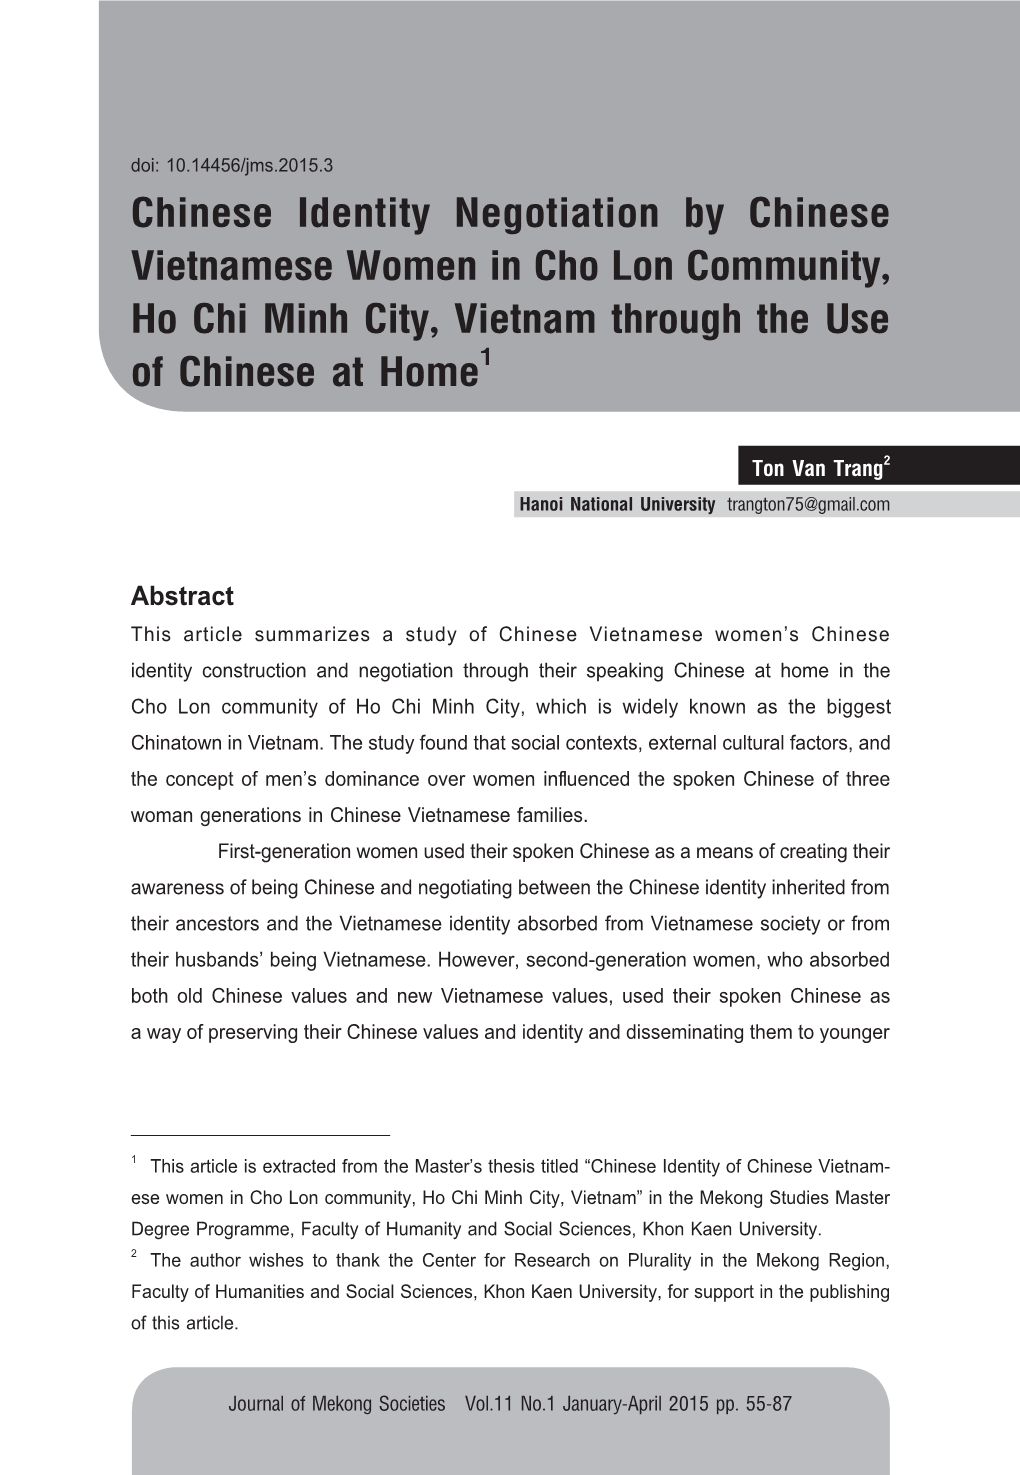 Chinese Identity Negotiation by Chinese Vietnamese Women in Cho Lon Community, Ho Chi Minh City, Vietnam Through the Use of Chinese at Home1